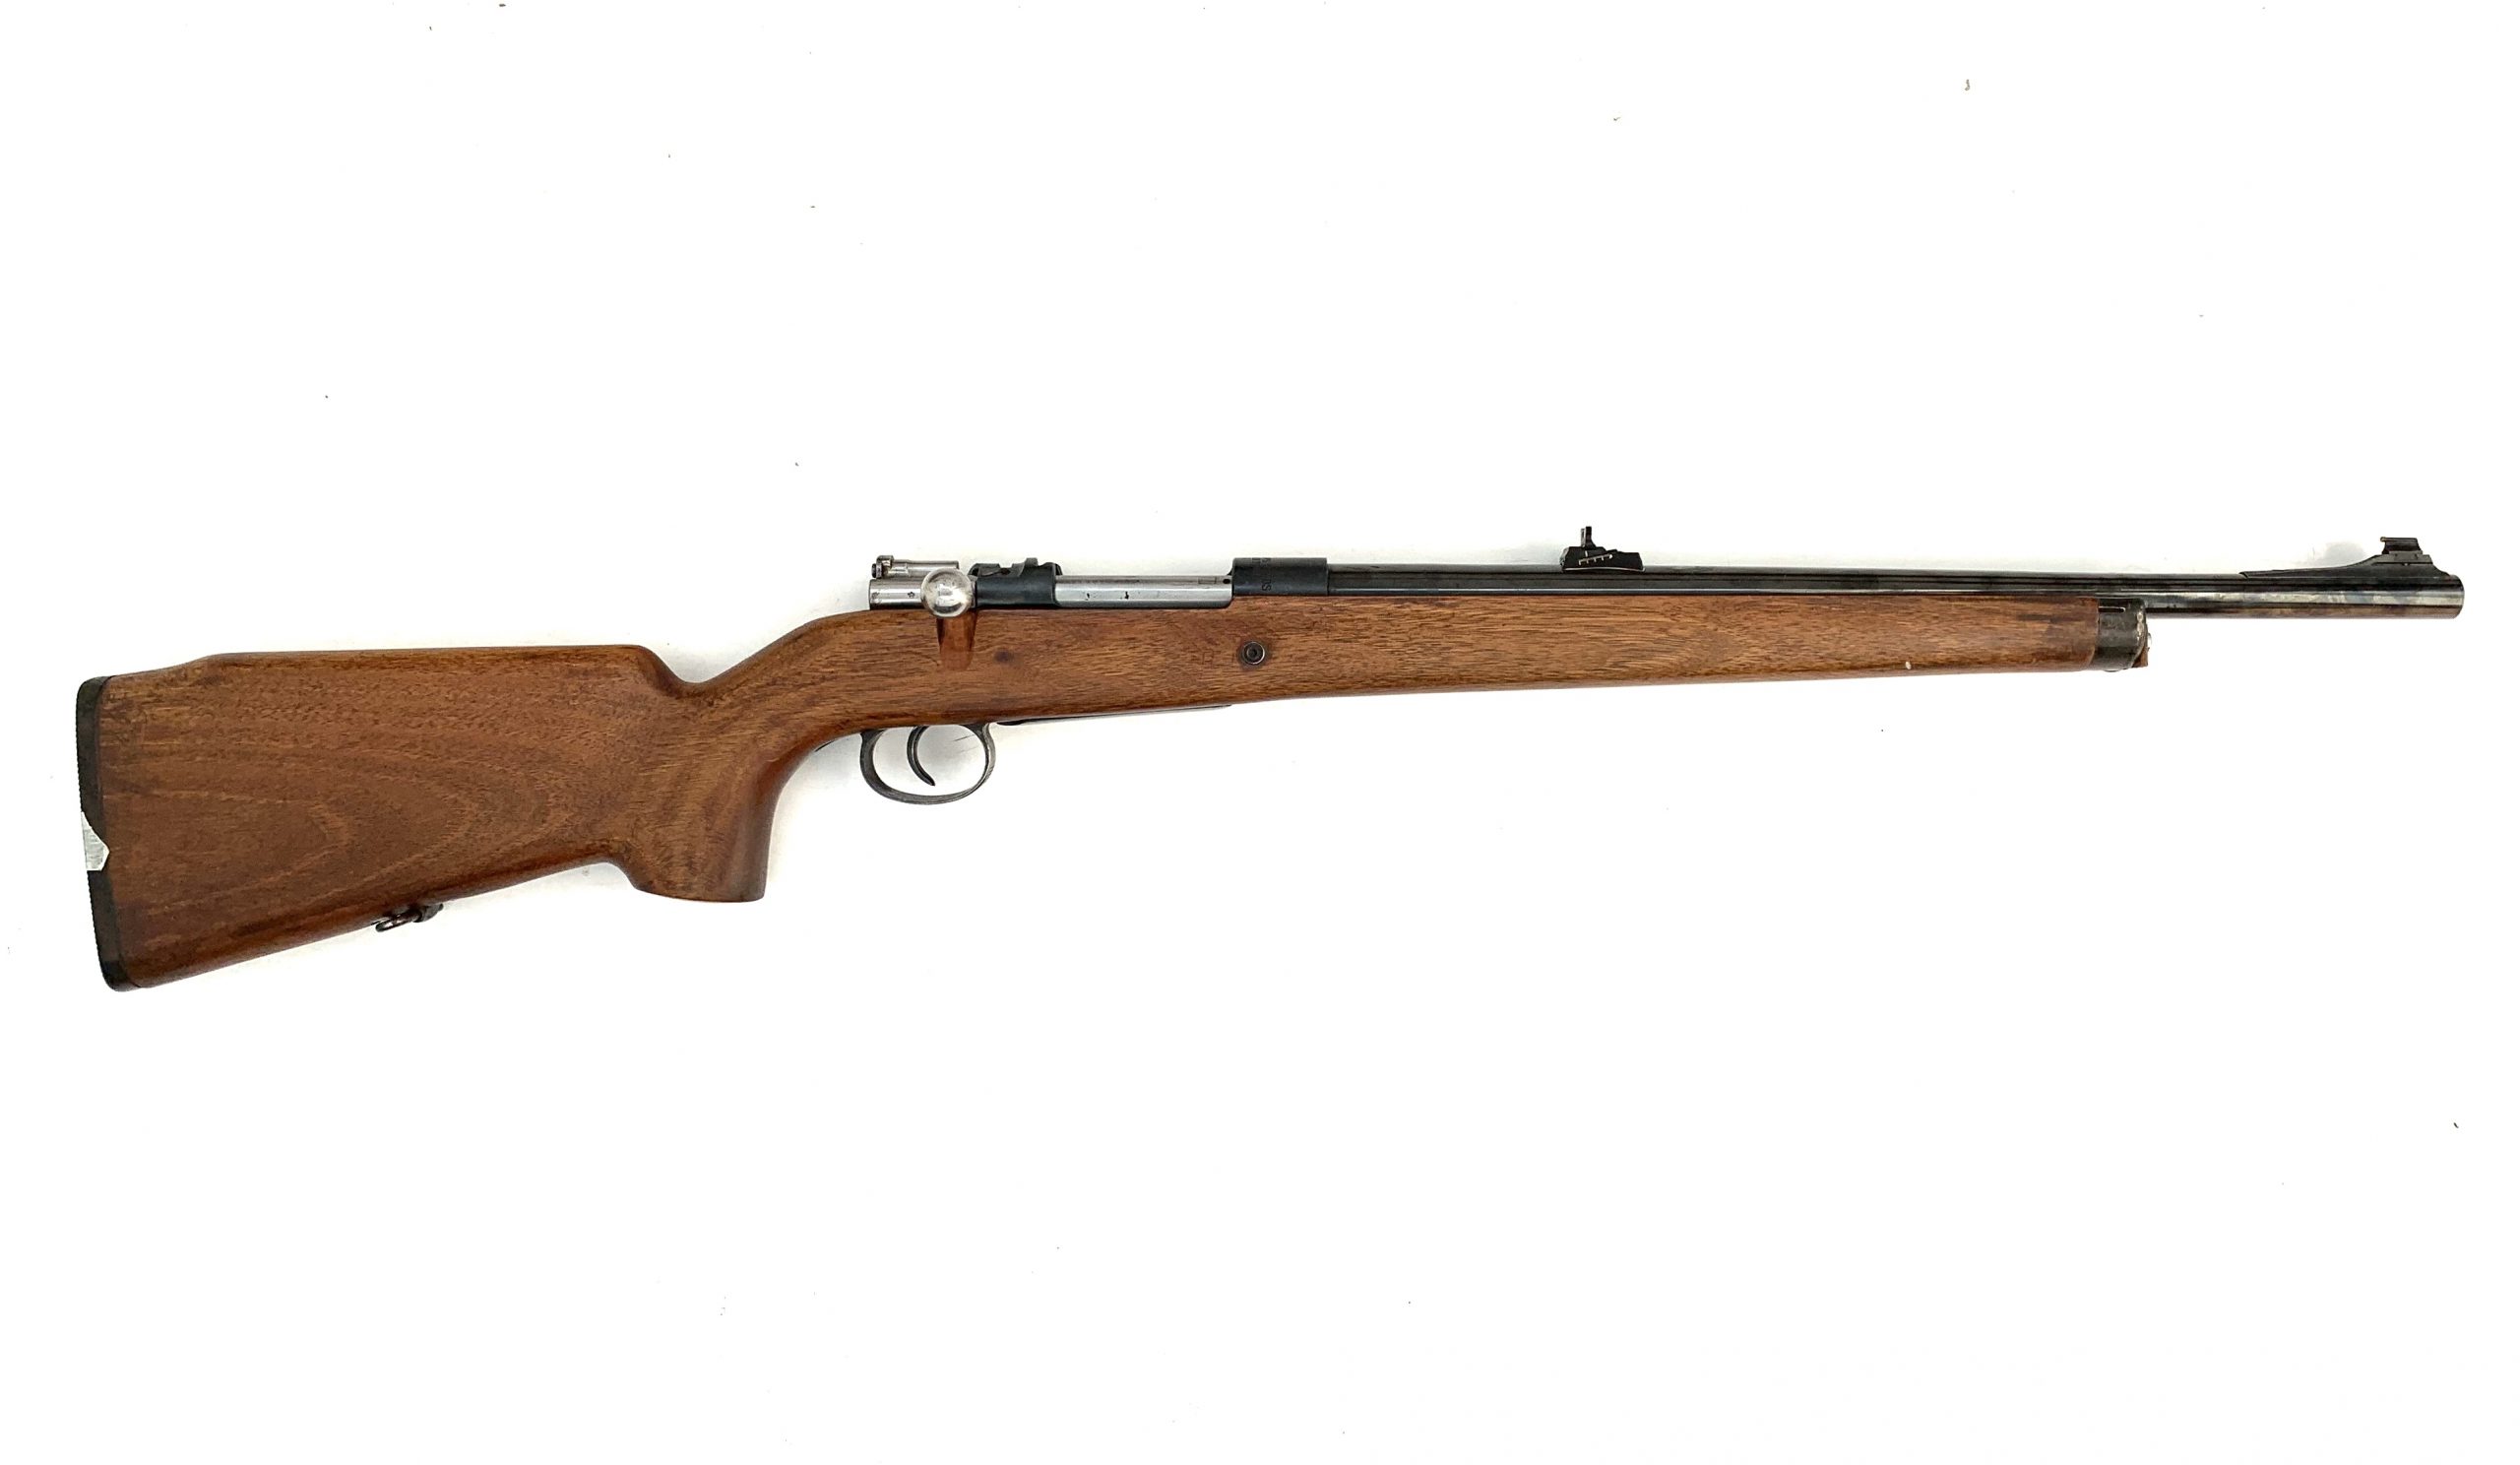 Military Surplus Firearm for Sale in Canada: Swedish Mauser M96 in 6.5x55.